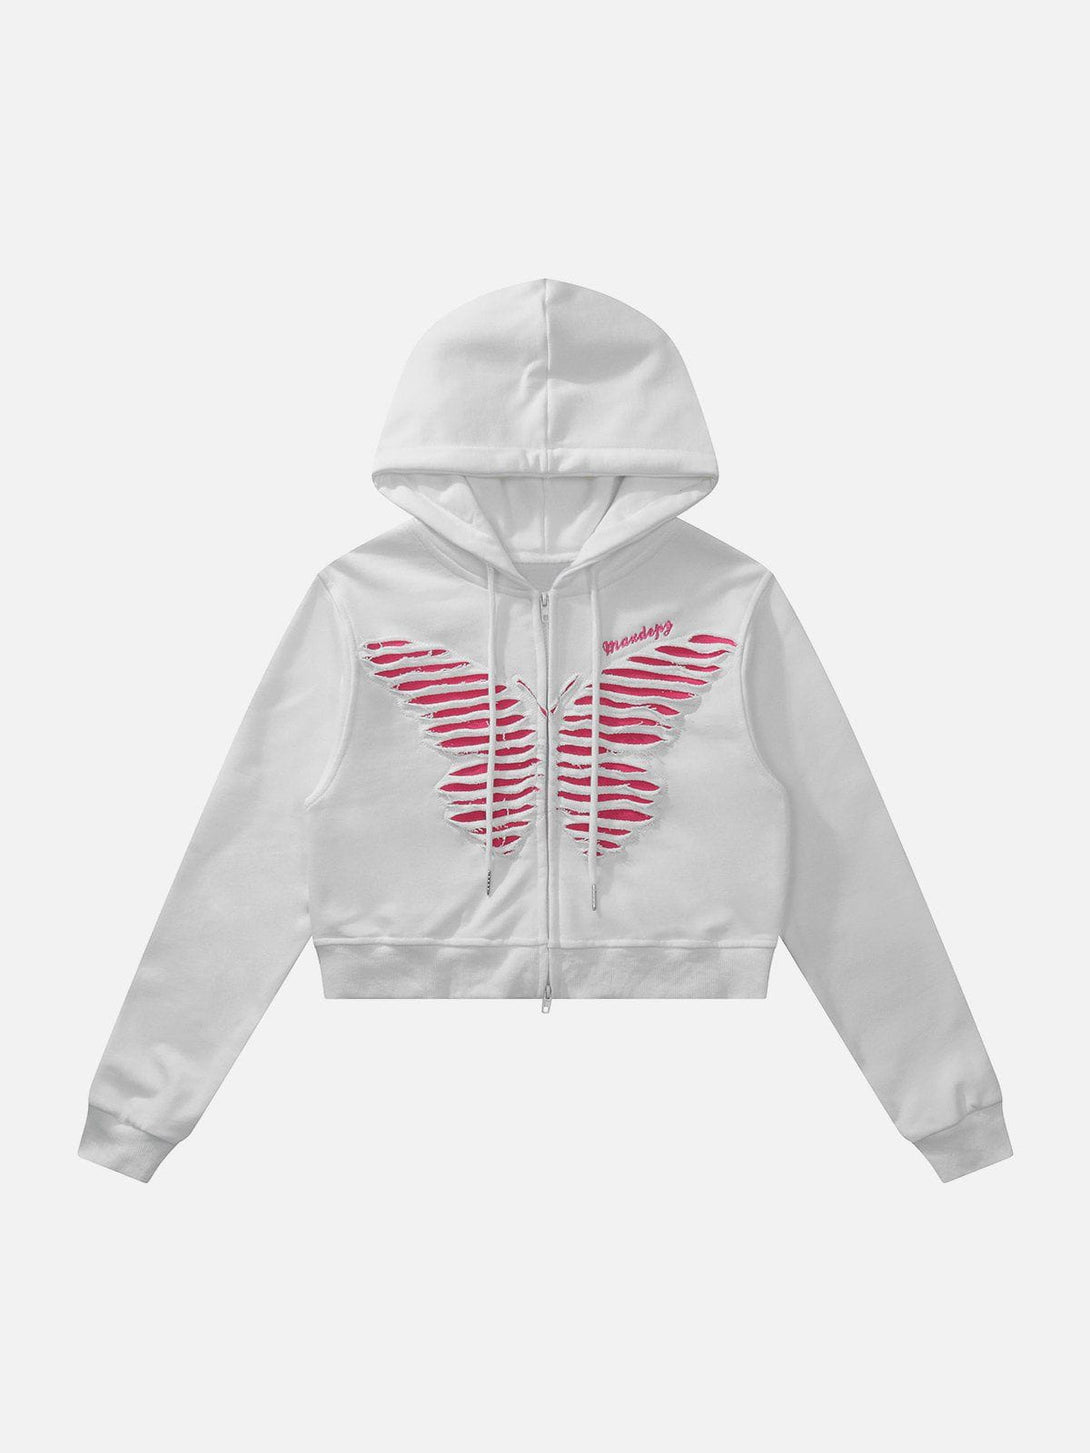 Majesda® - Holey Butterfly Regular Hoodie outfit ideas streetwear fashion